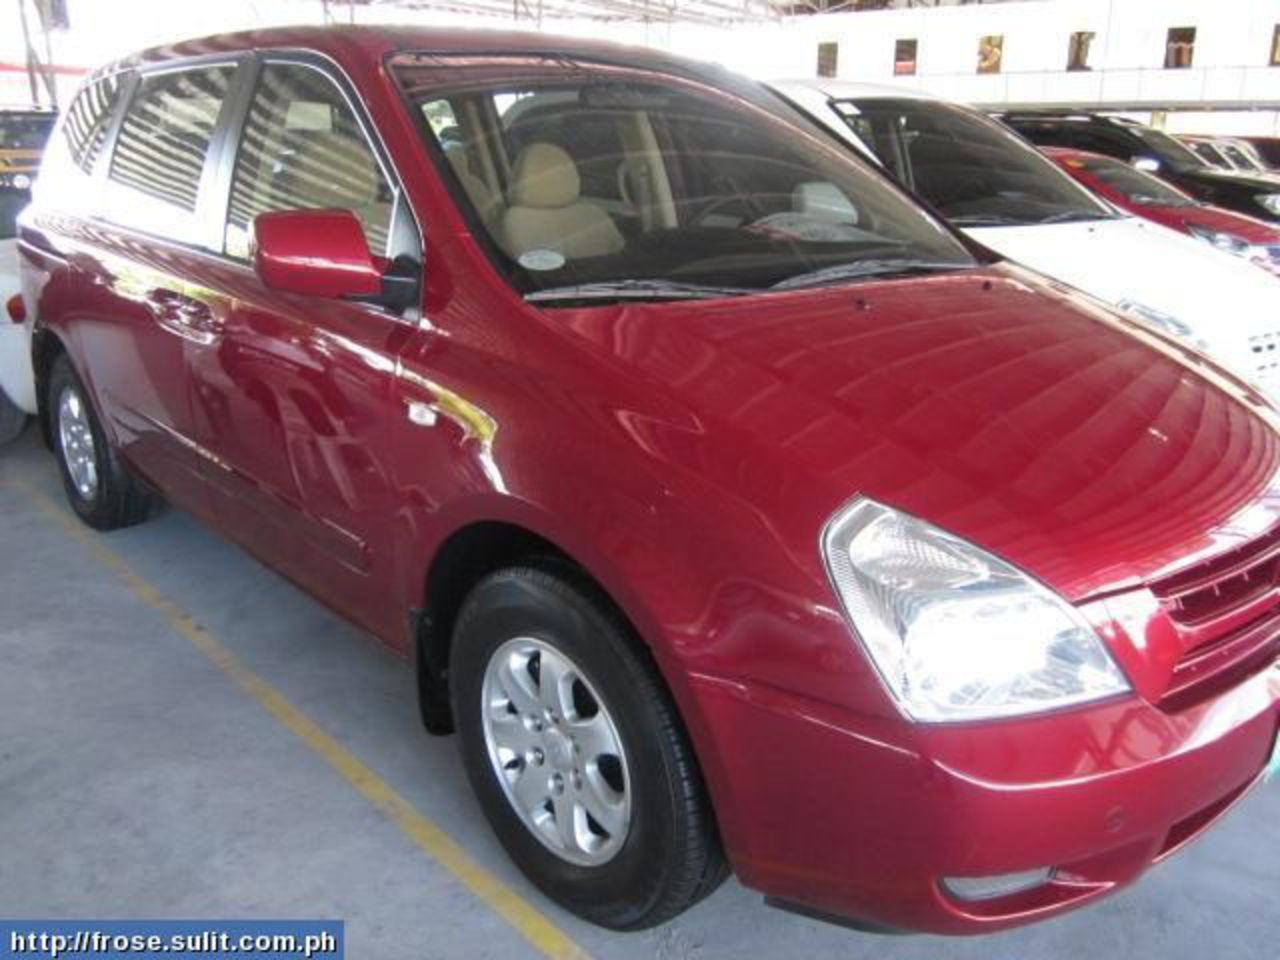 Kia Carnival LX 2008 a/t diesel color red - Philippines - 7833267